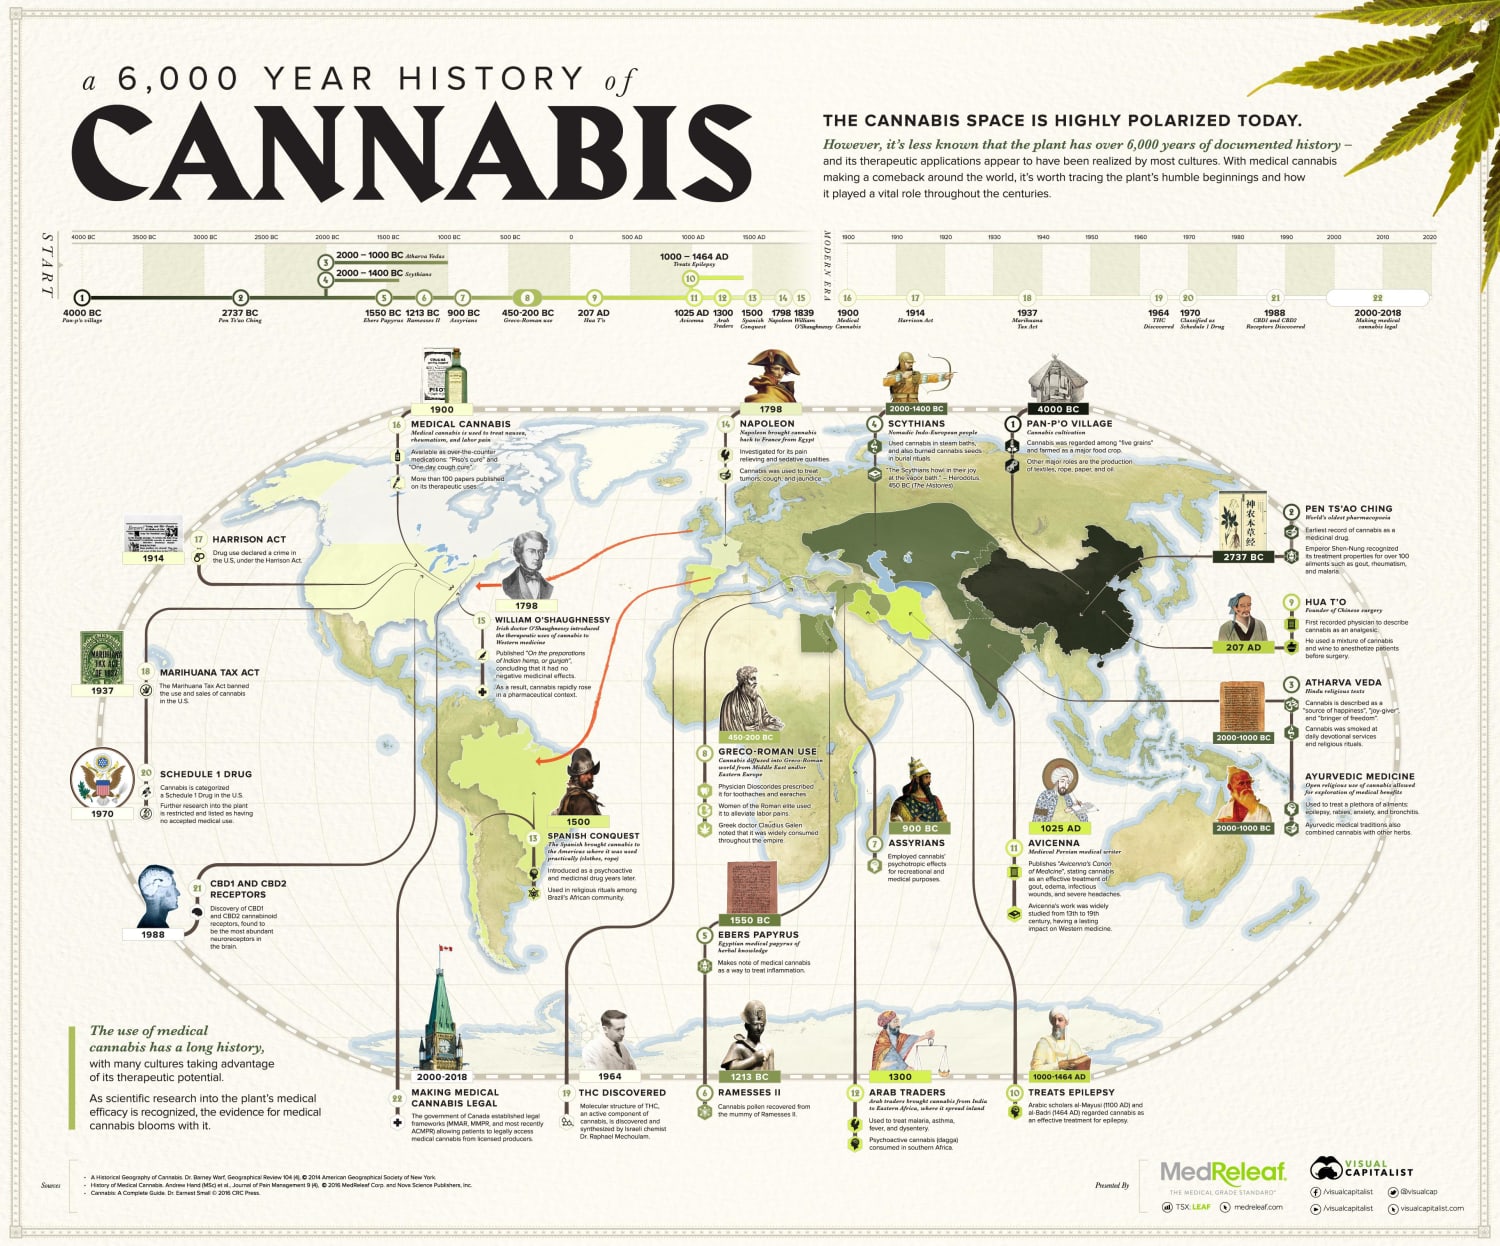 6,000 year history of cannabis in map form